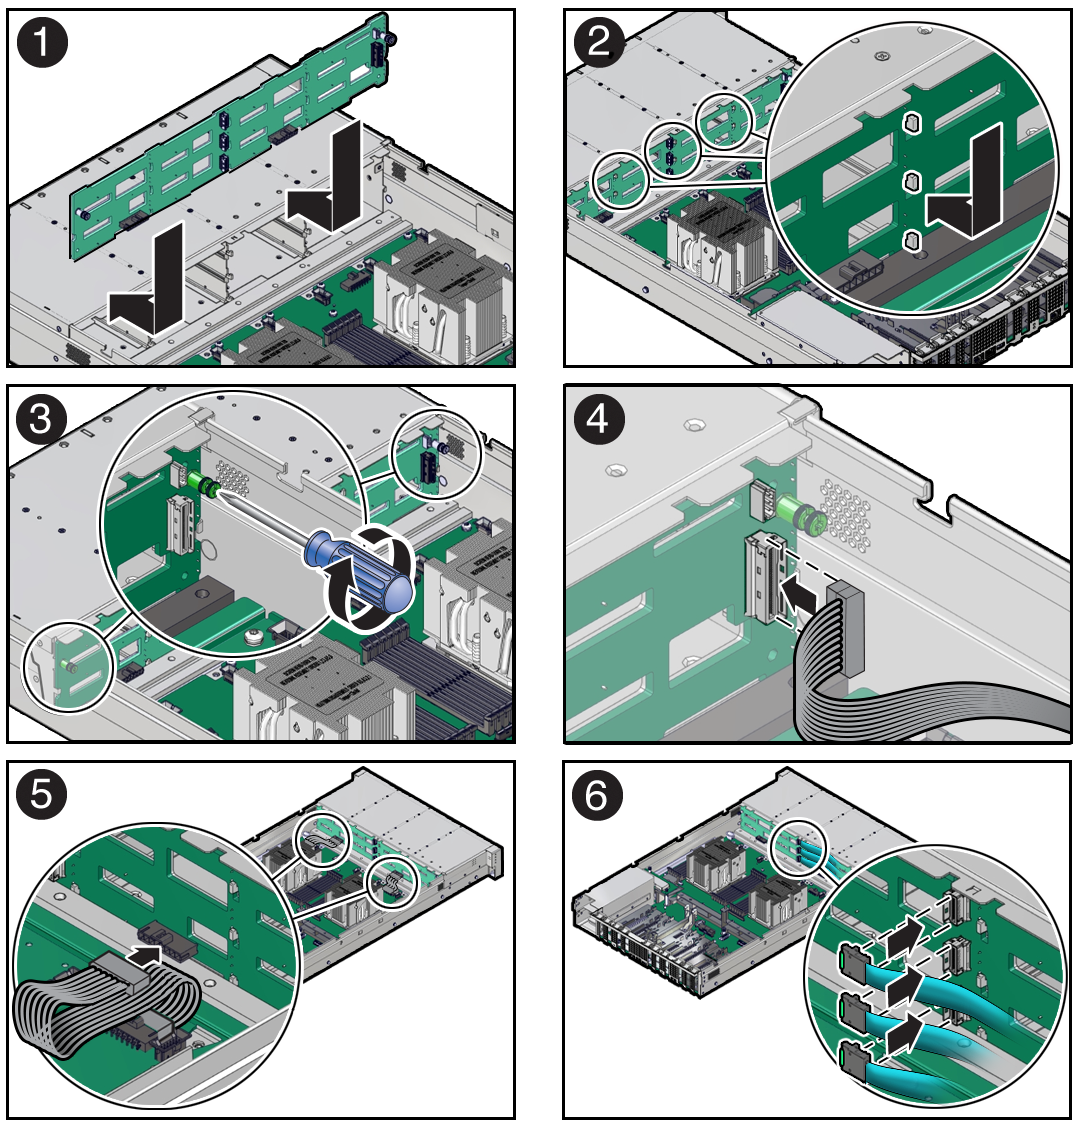 Figure showing the 12-Disk backplane being installed in the server.